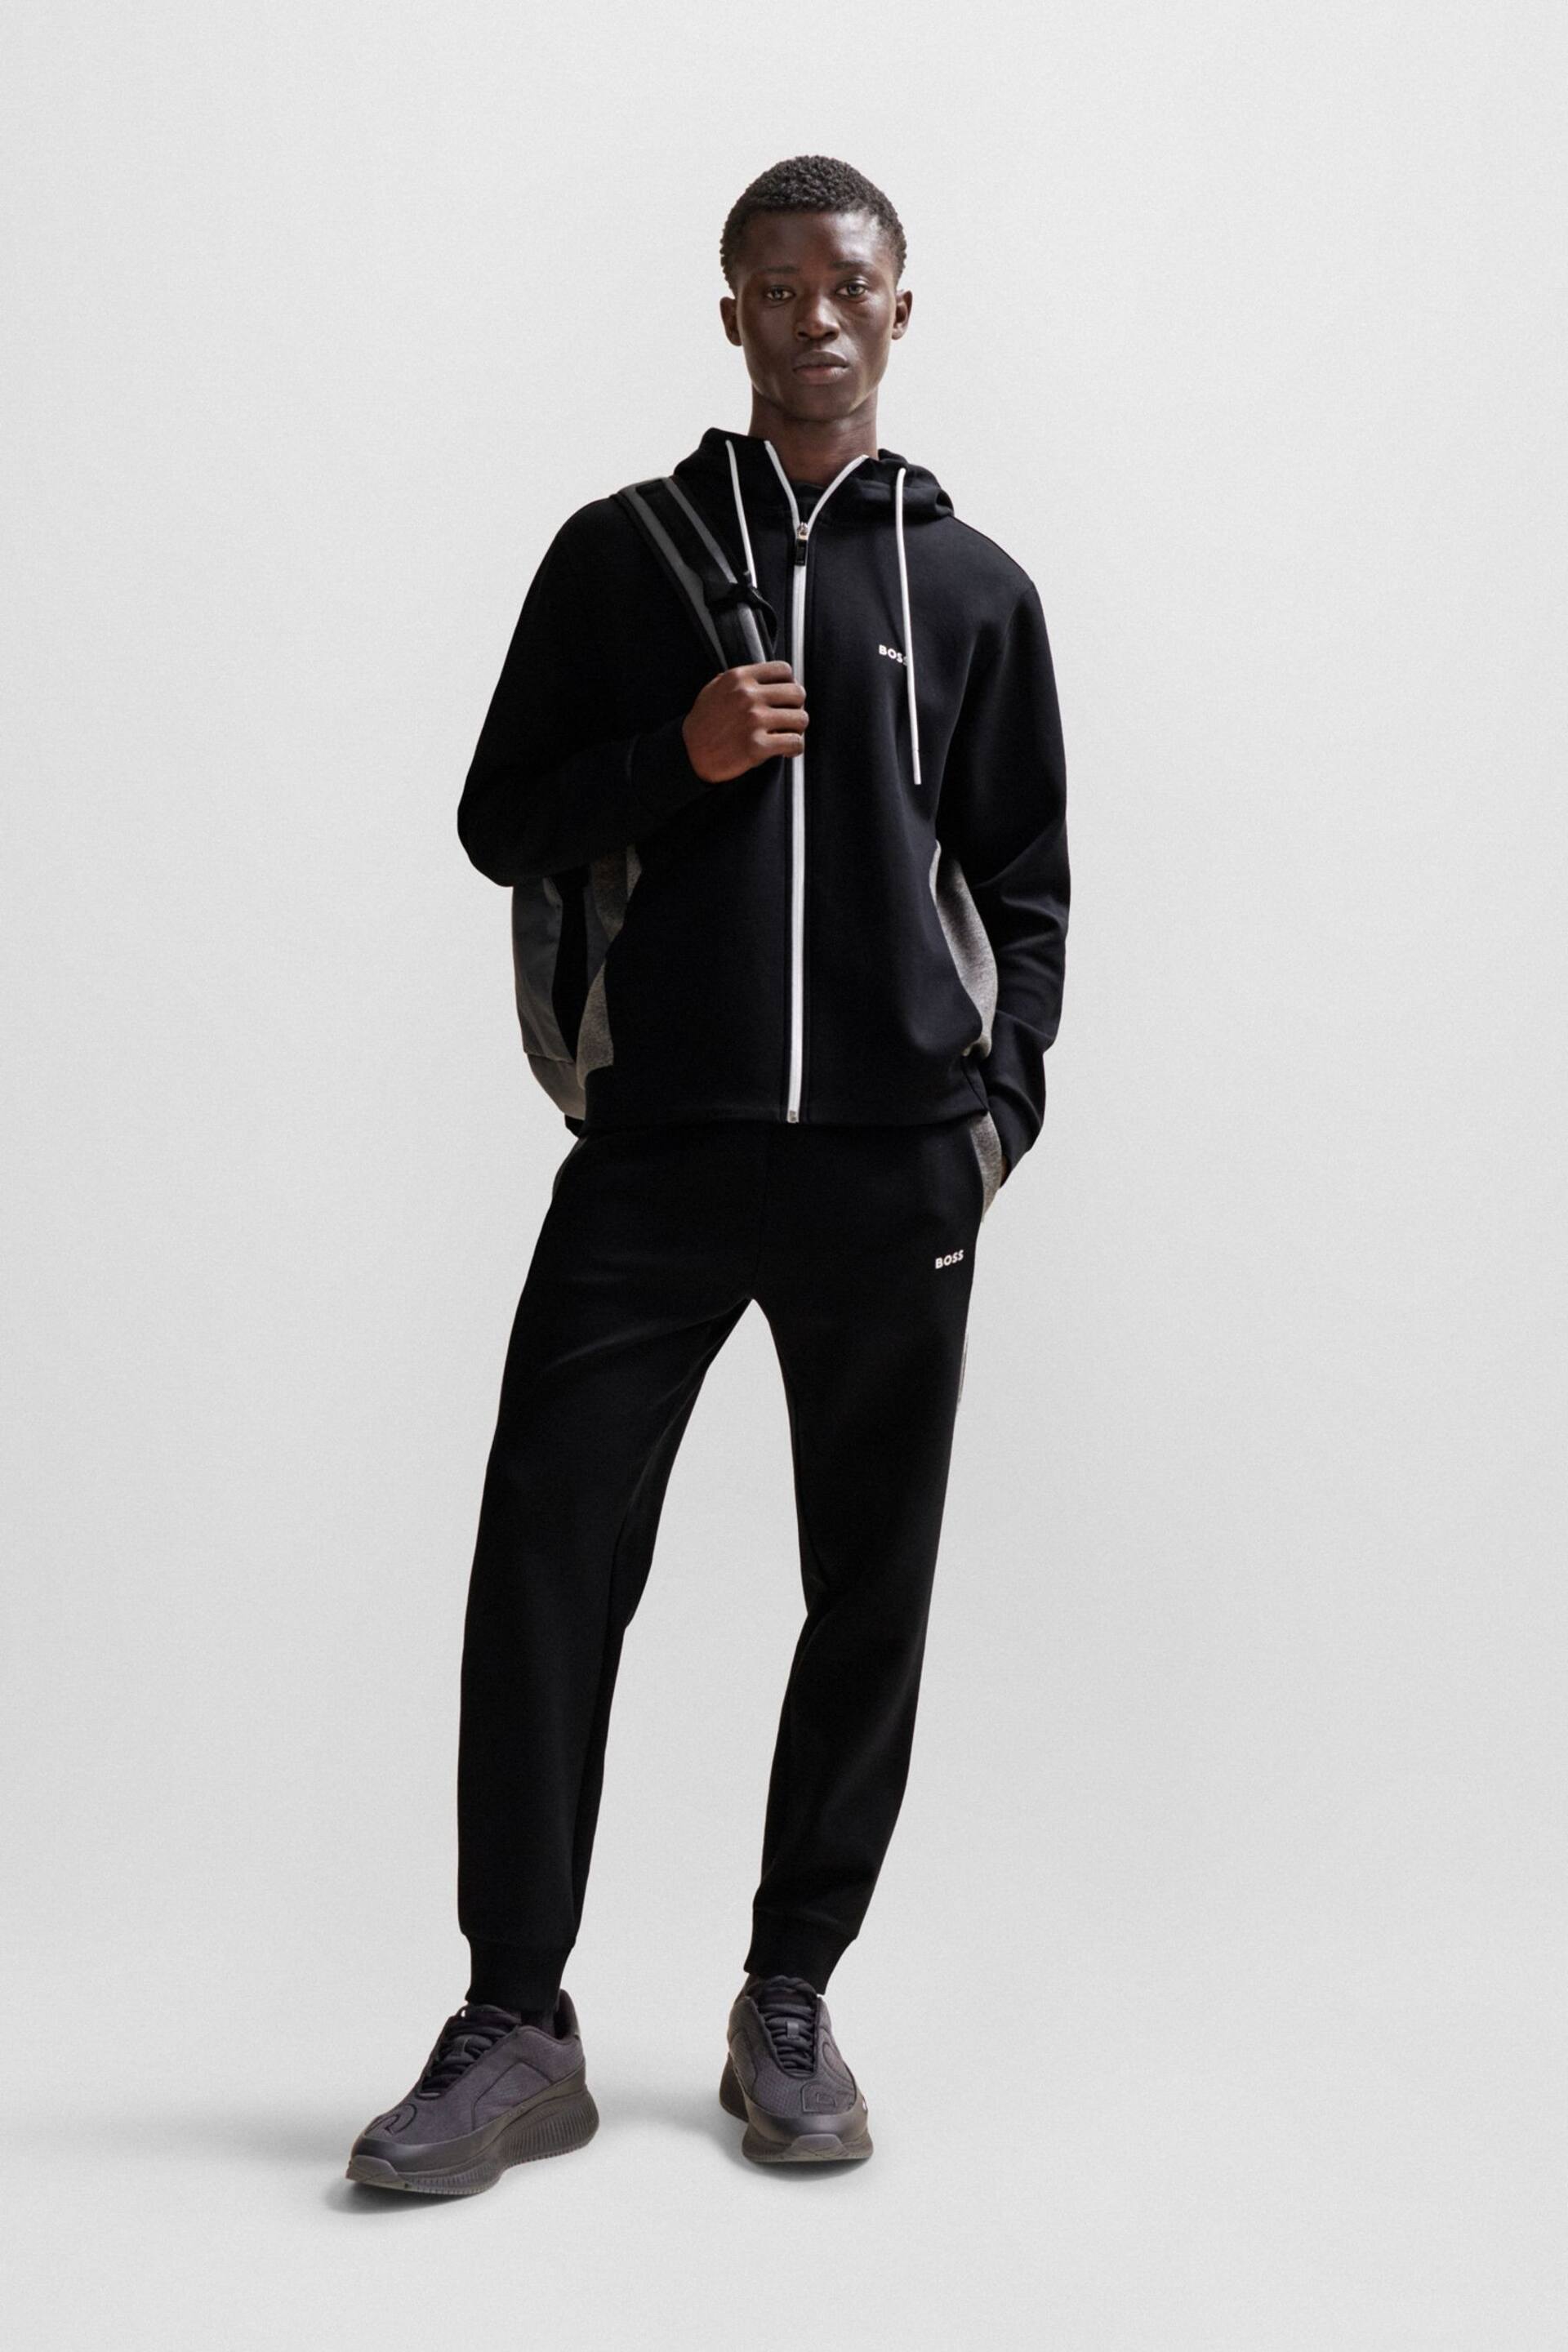 BOSS Black Stretch Cotton Contrast Zip Up Tracksuit Hoodie - Image 3 of 5